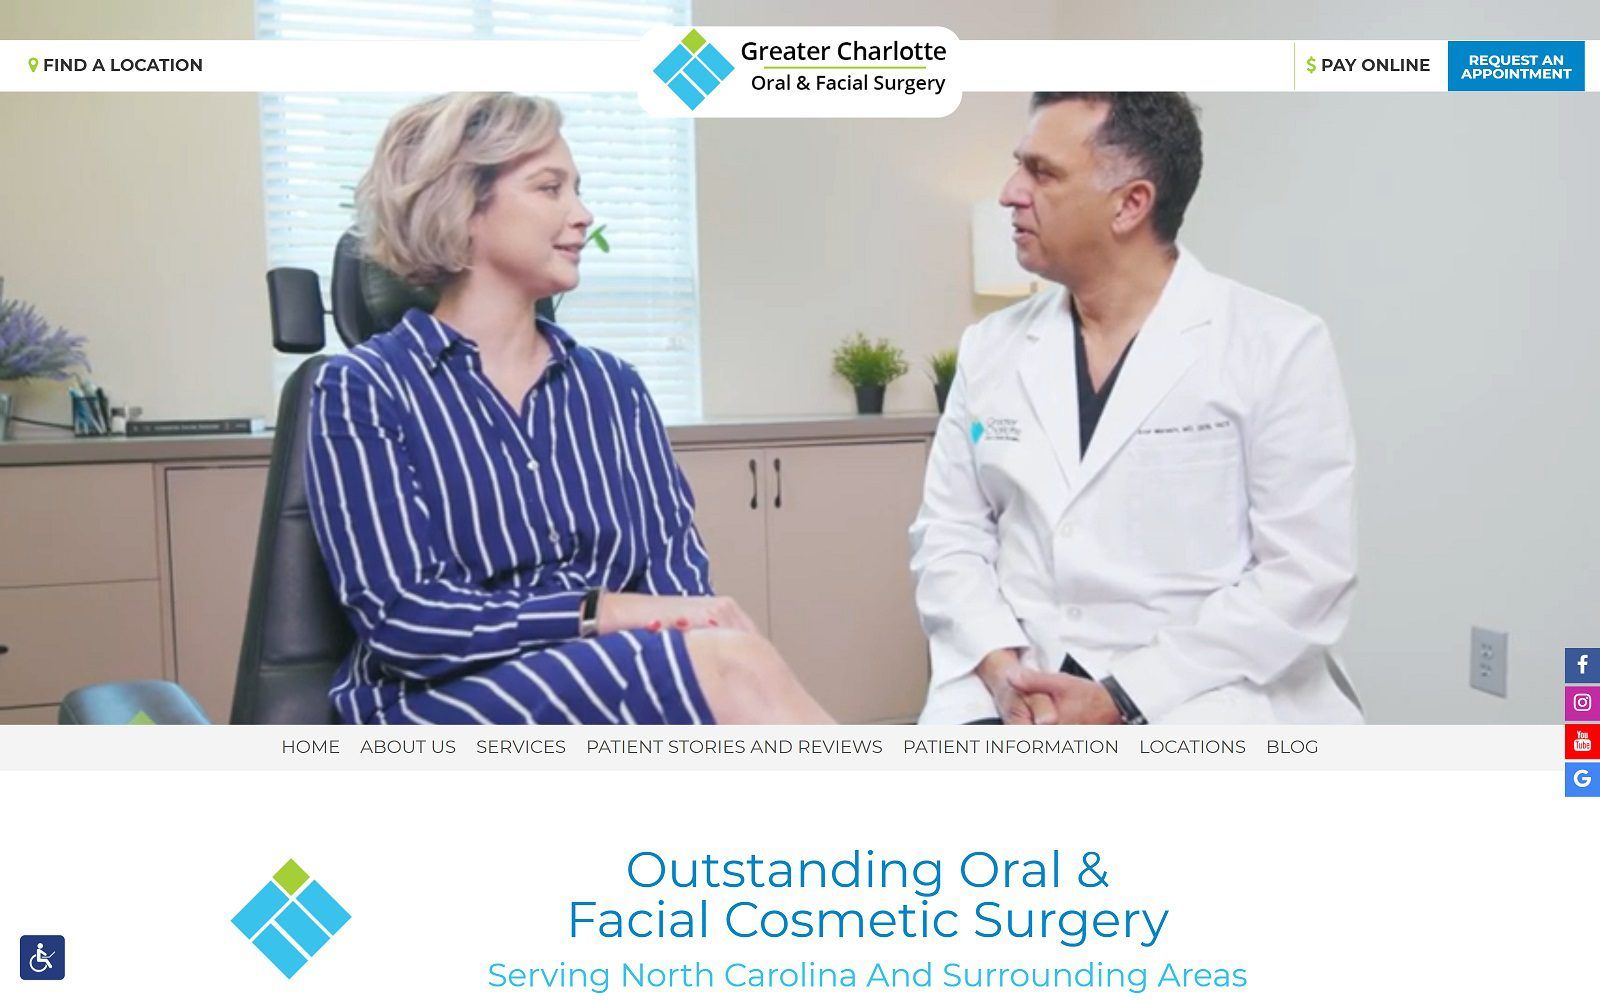 The screenshot of greater charlotte oral & facial surgery website